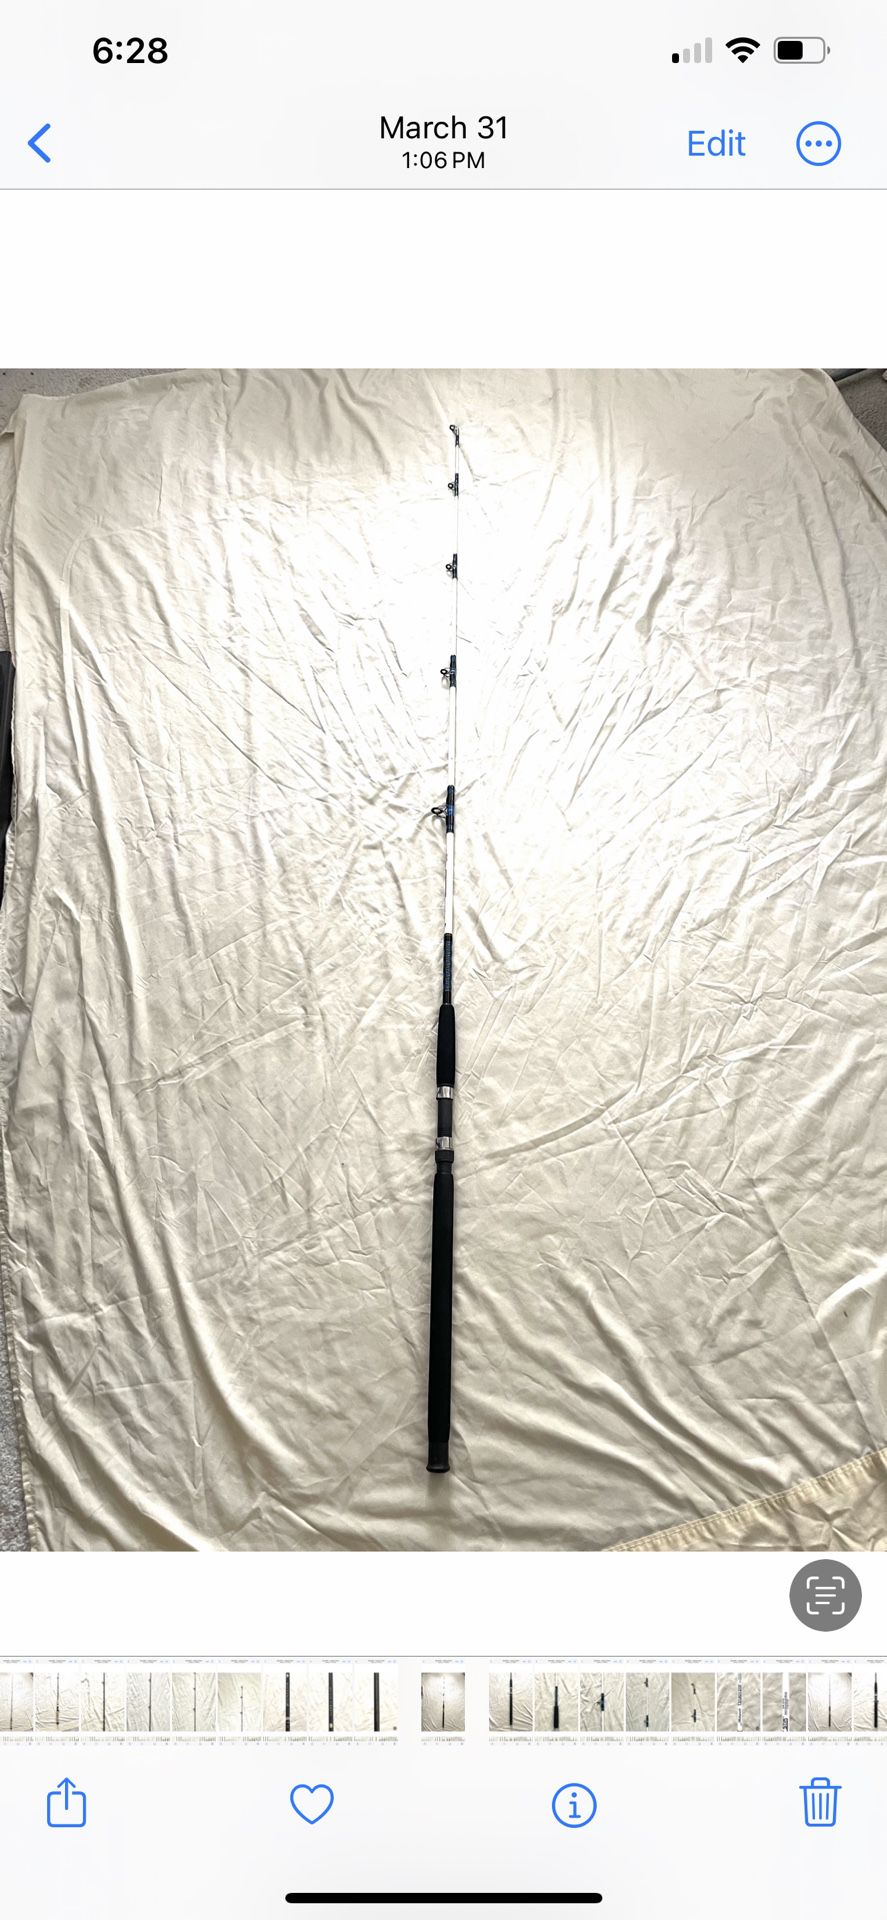 You Only Use Once Shakespeare Sturdy Stik 6 1/2 foot medium, heavy action boat, fishing rod